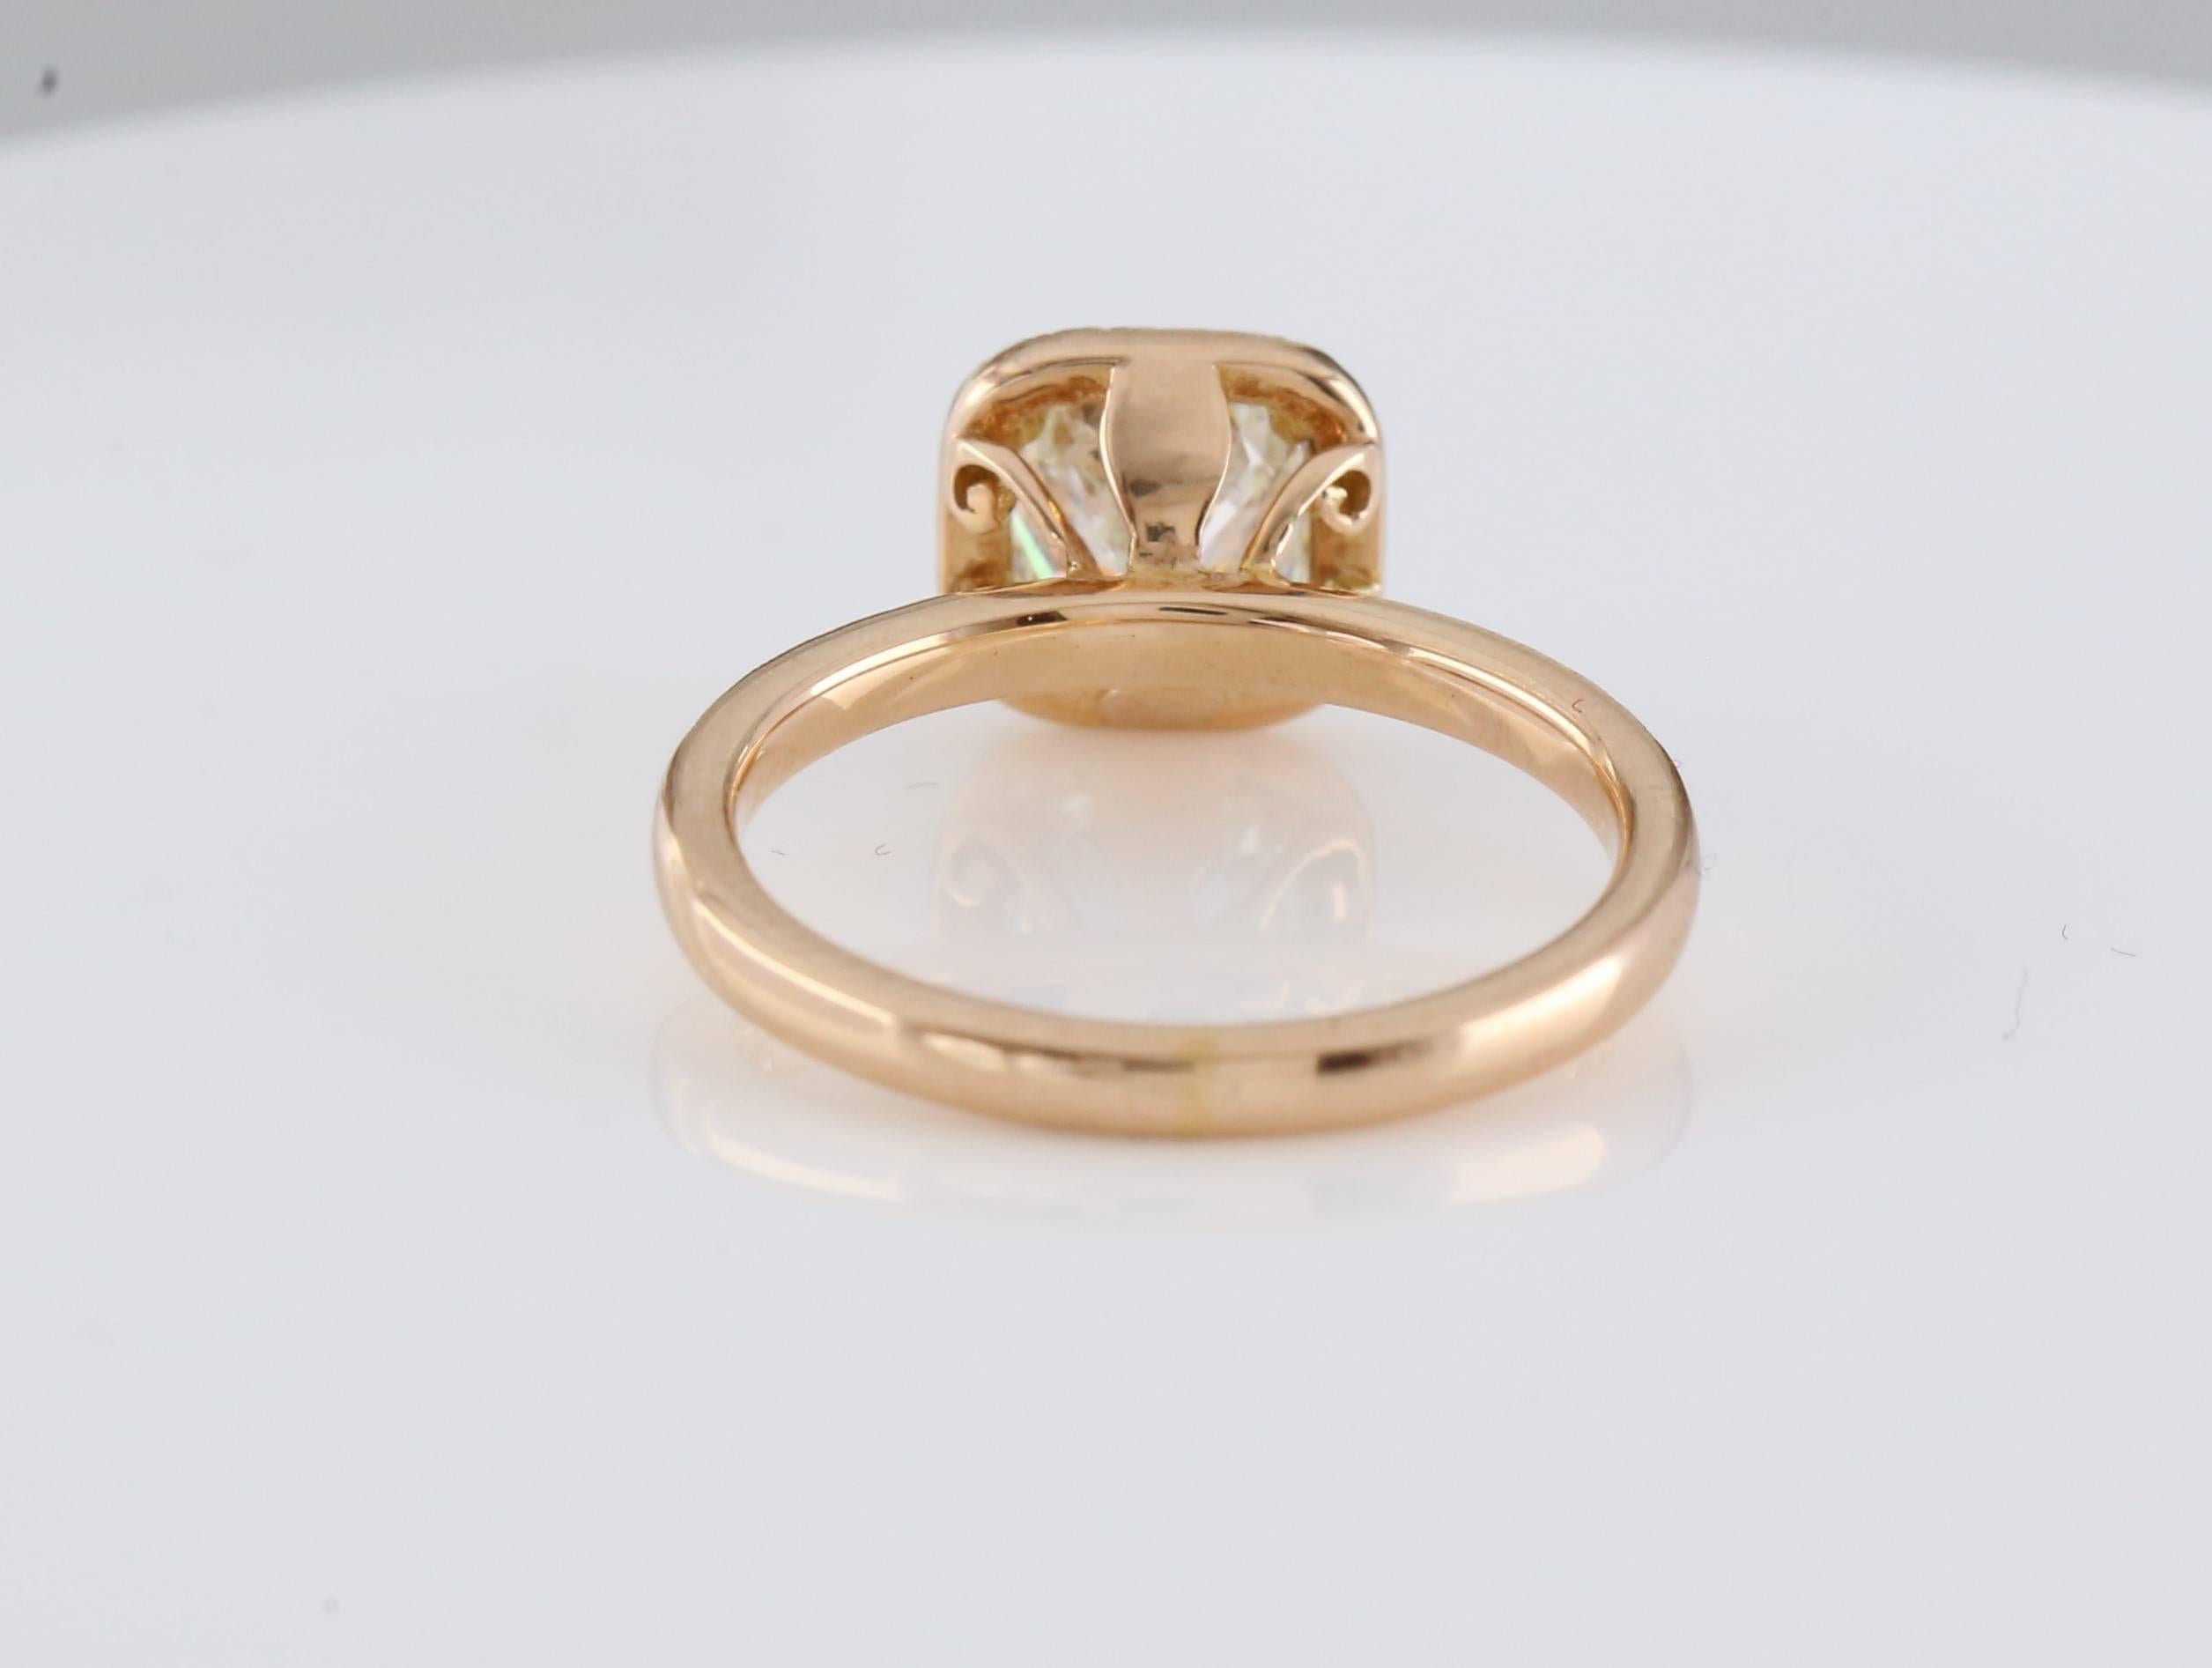 18ct Rose/red gold diamond halo ring, Centre diamond 1.01ct Cushion Cut, Colour I, Clarity VS2, Set in a halo of 36 x round brilliant diamonds, Carat weight 0.18ct total F-G colour and VS Clarity.
Hallmarked 750 weighs 2.99g handmade.
WGI